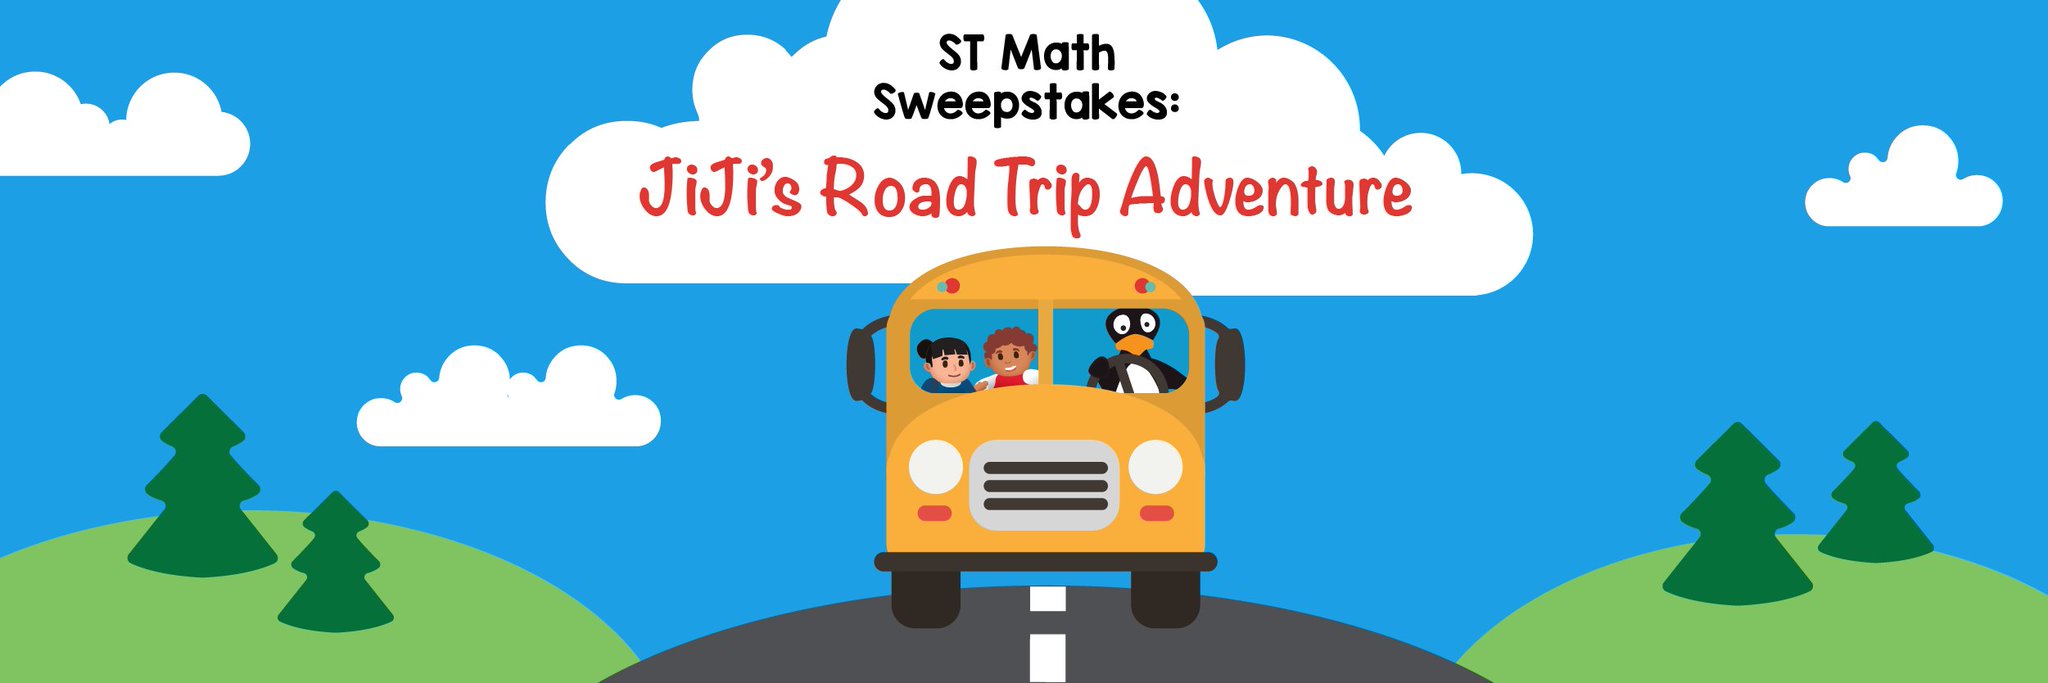 ST Math on Twitter: "JiJi FAQs: You asked, we answered! Learn all about